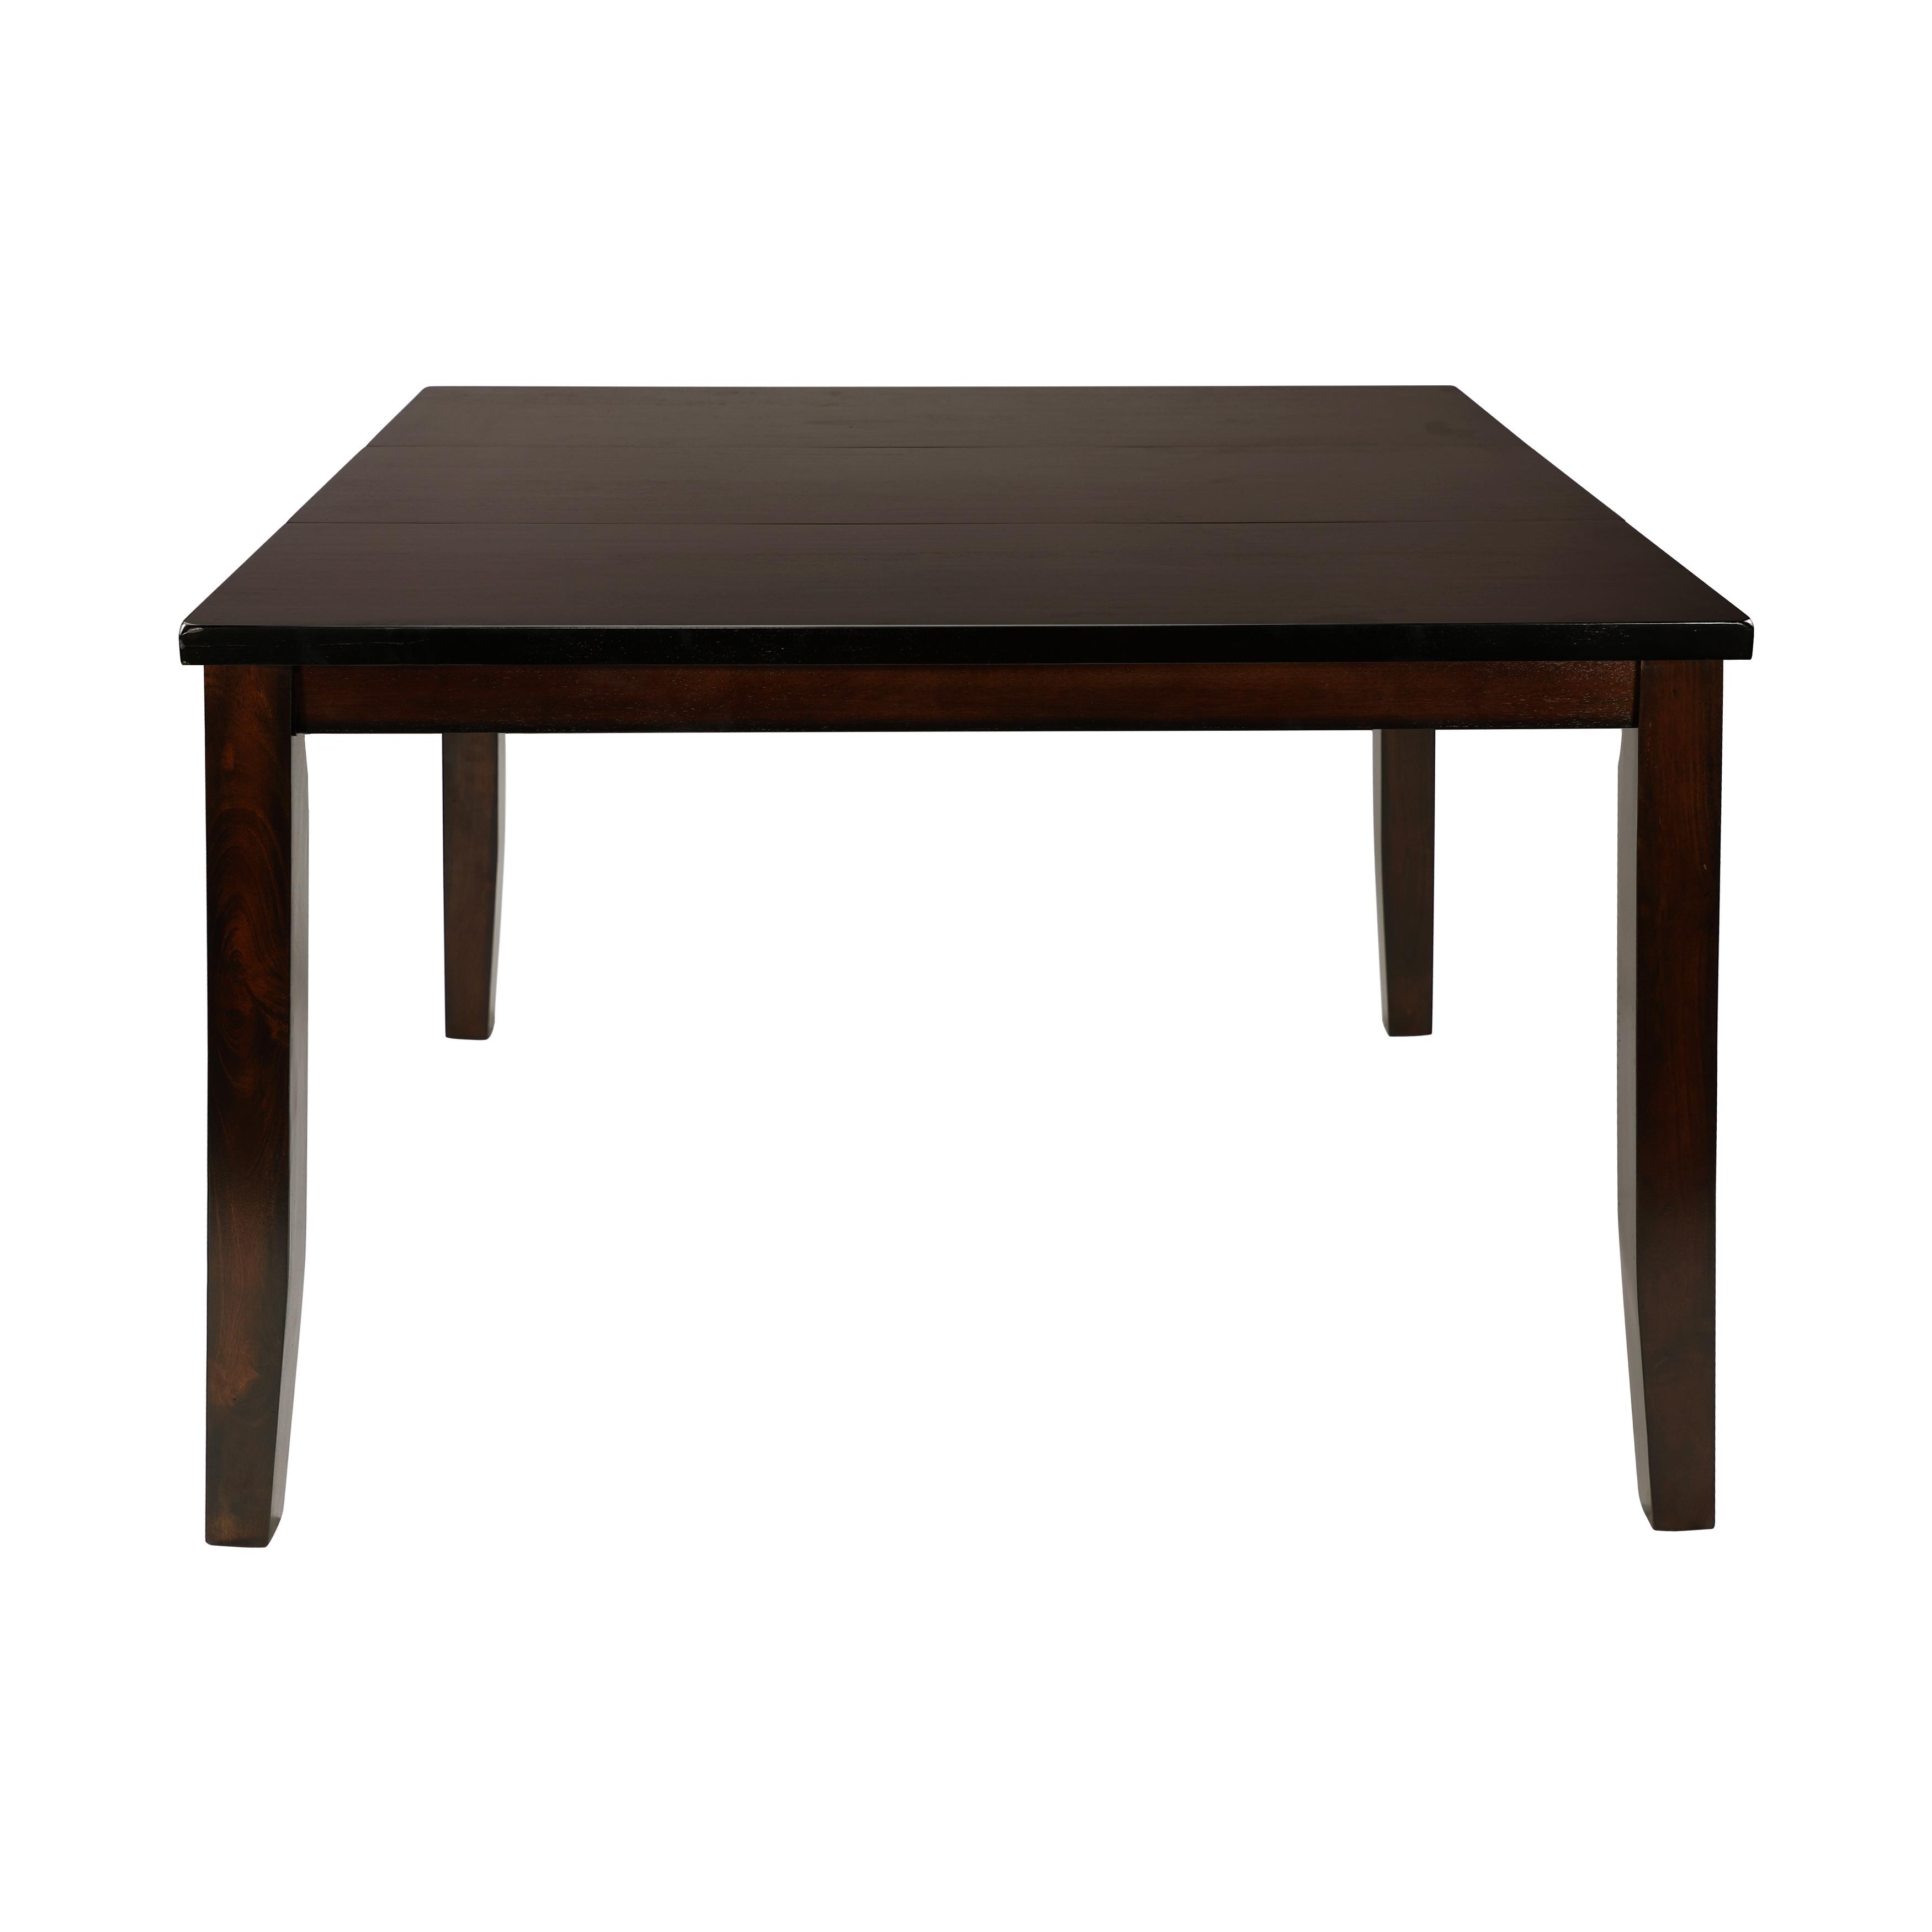 Transitional Counter Height Table 5547-36 Mantello 5547-36 in Cherry 